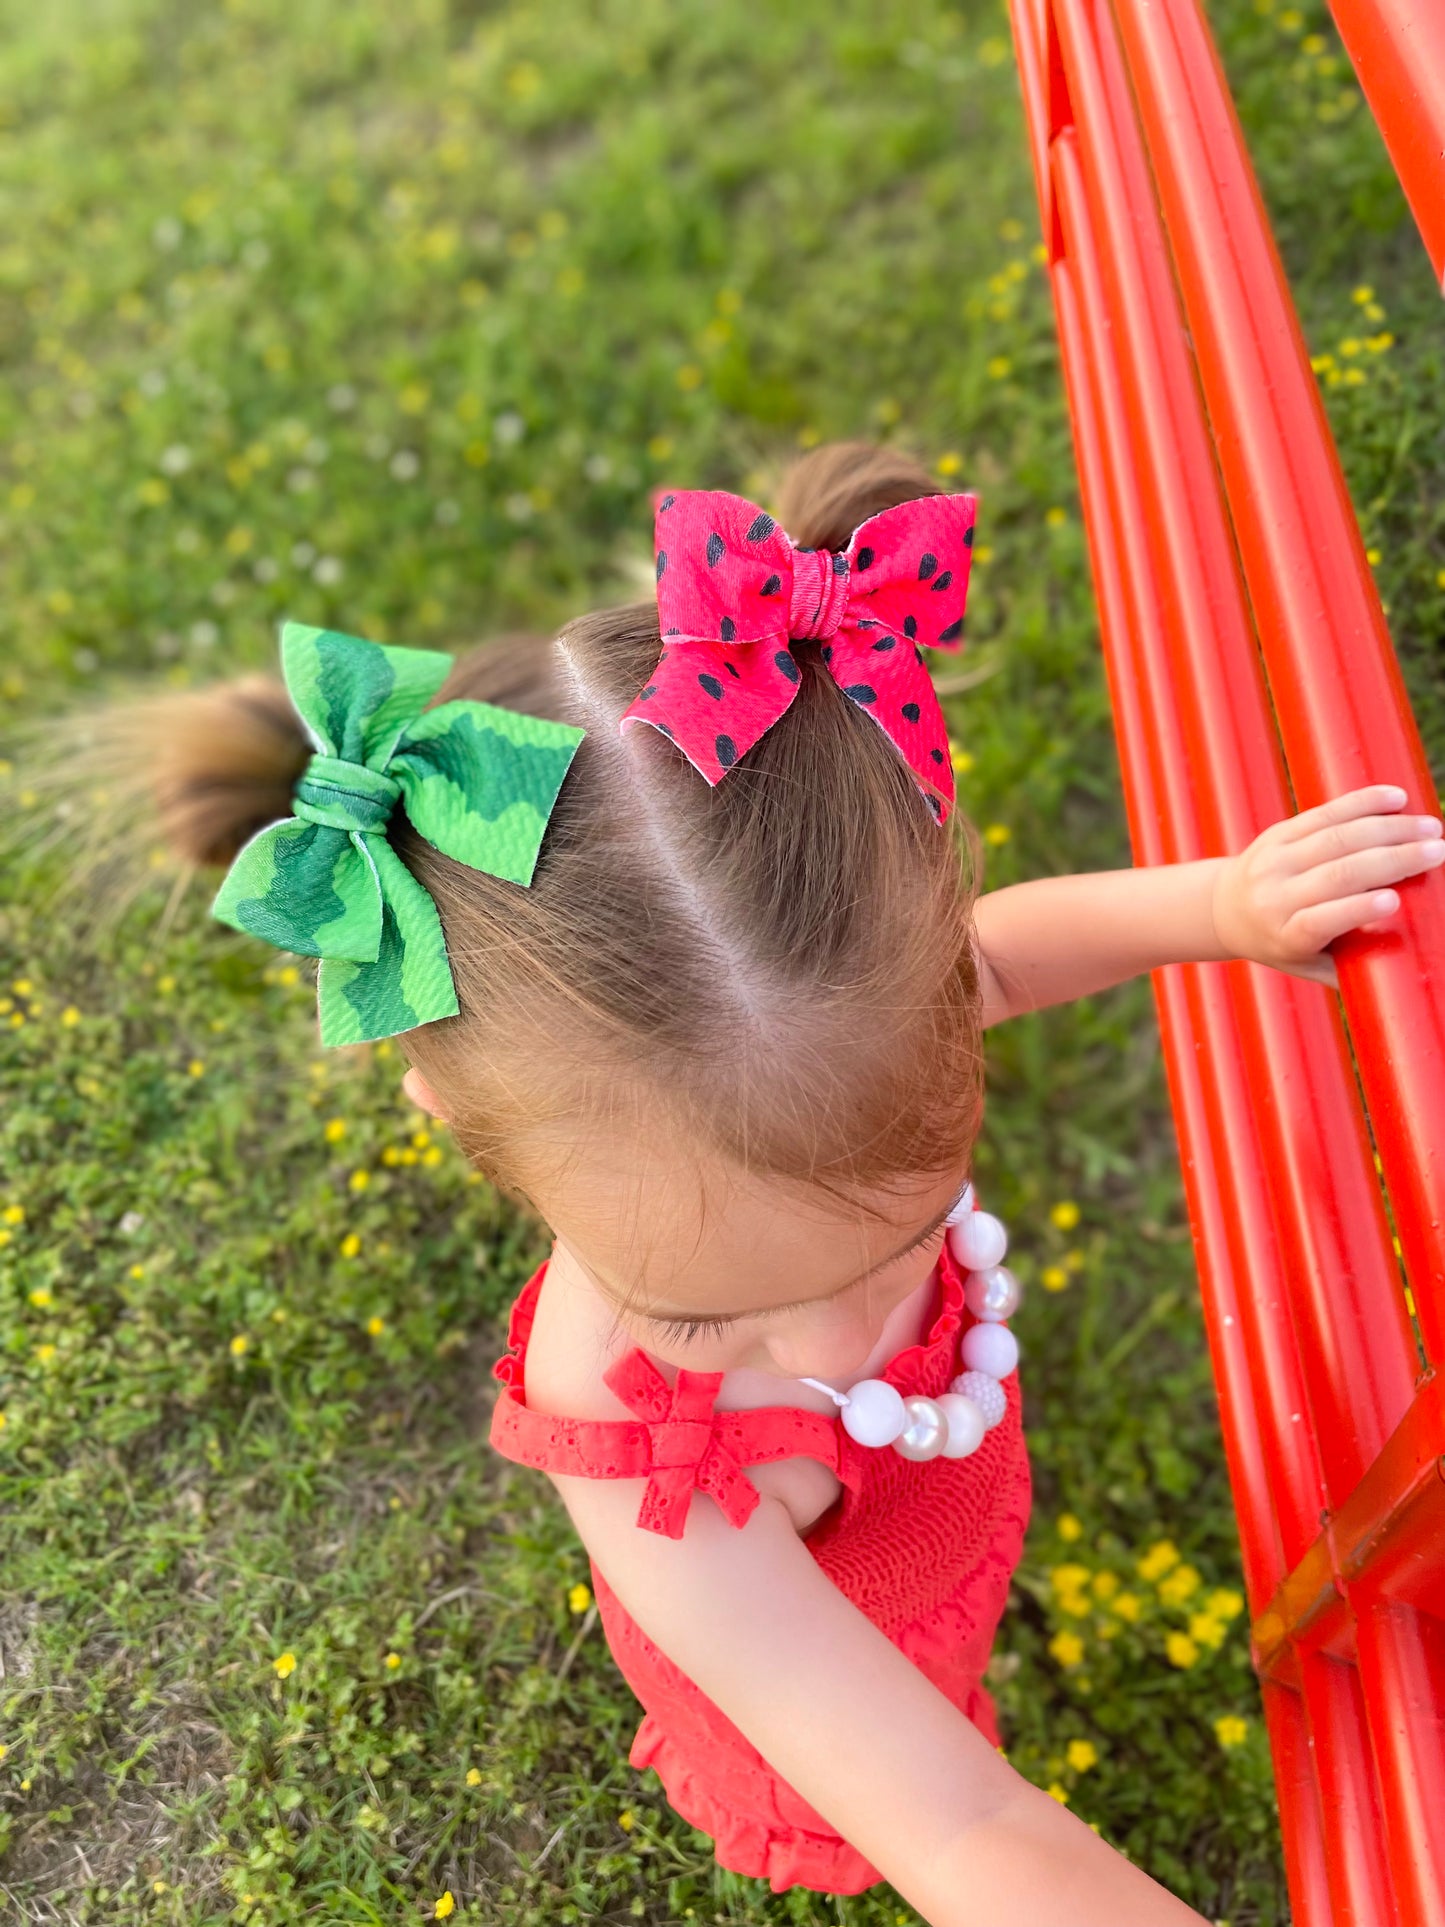 Watermelon Rind Pigtails